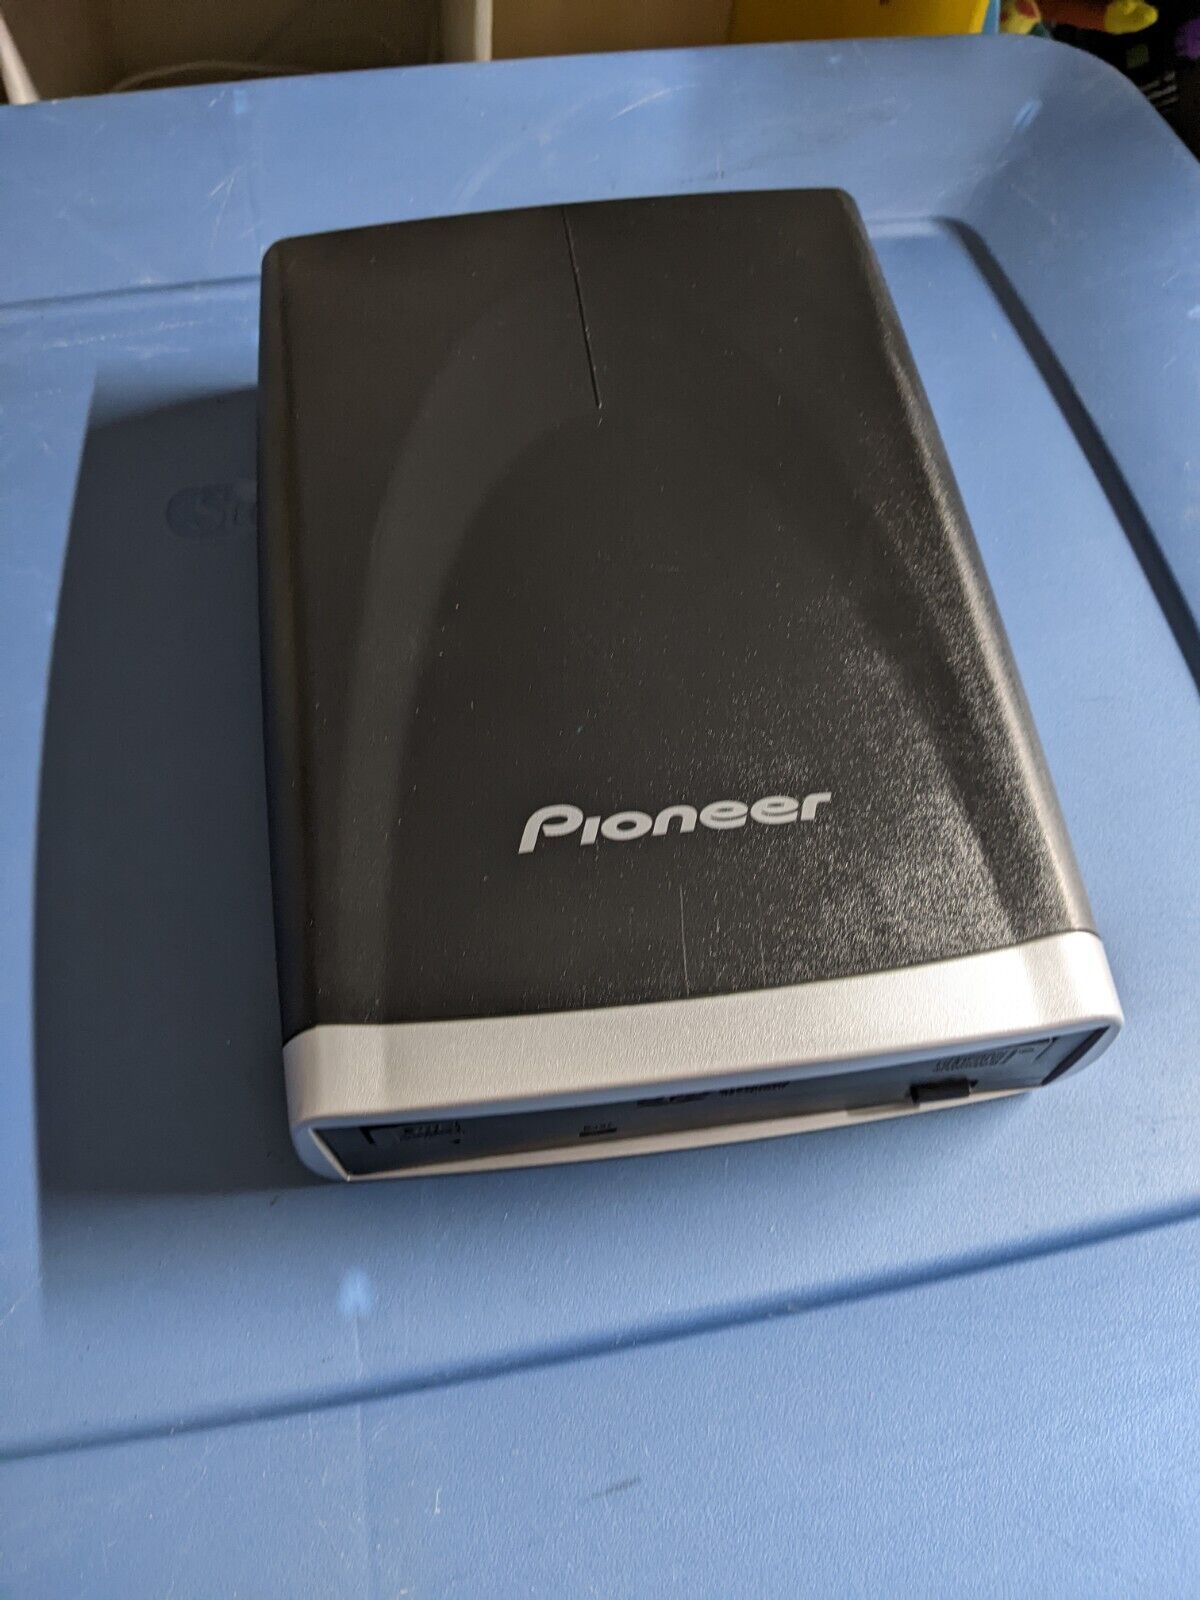 Vintage Pioneer CD DVD Writer Drive DVR-X122 - UNIT ONLY - USED VG